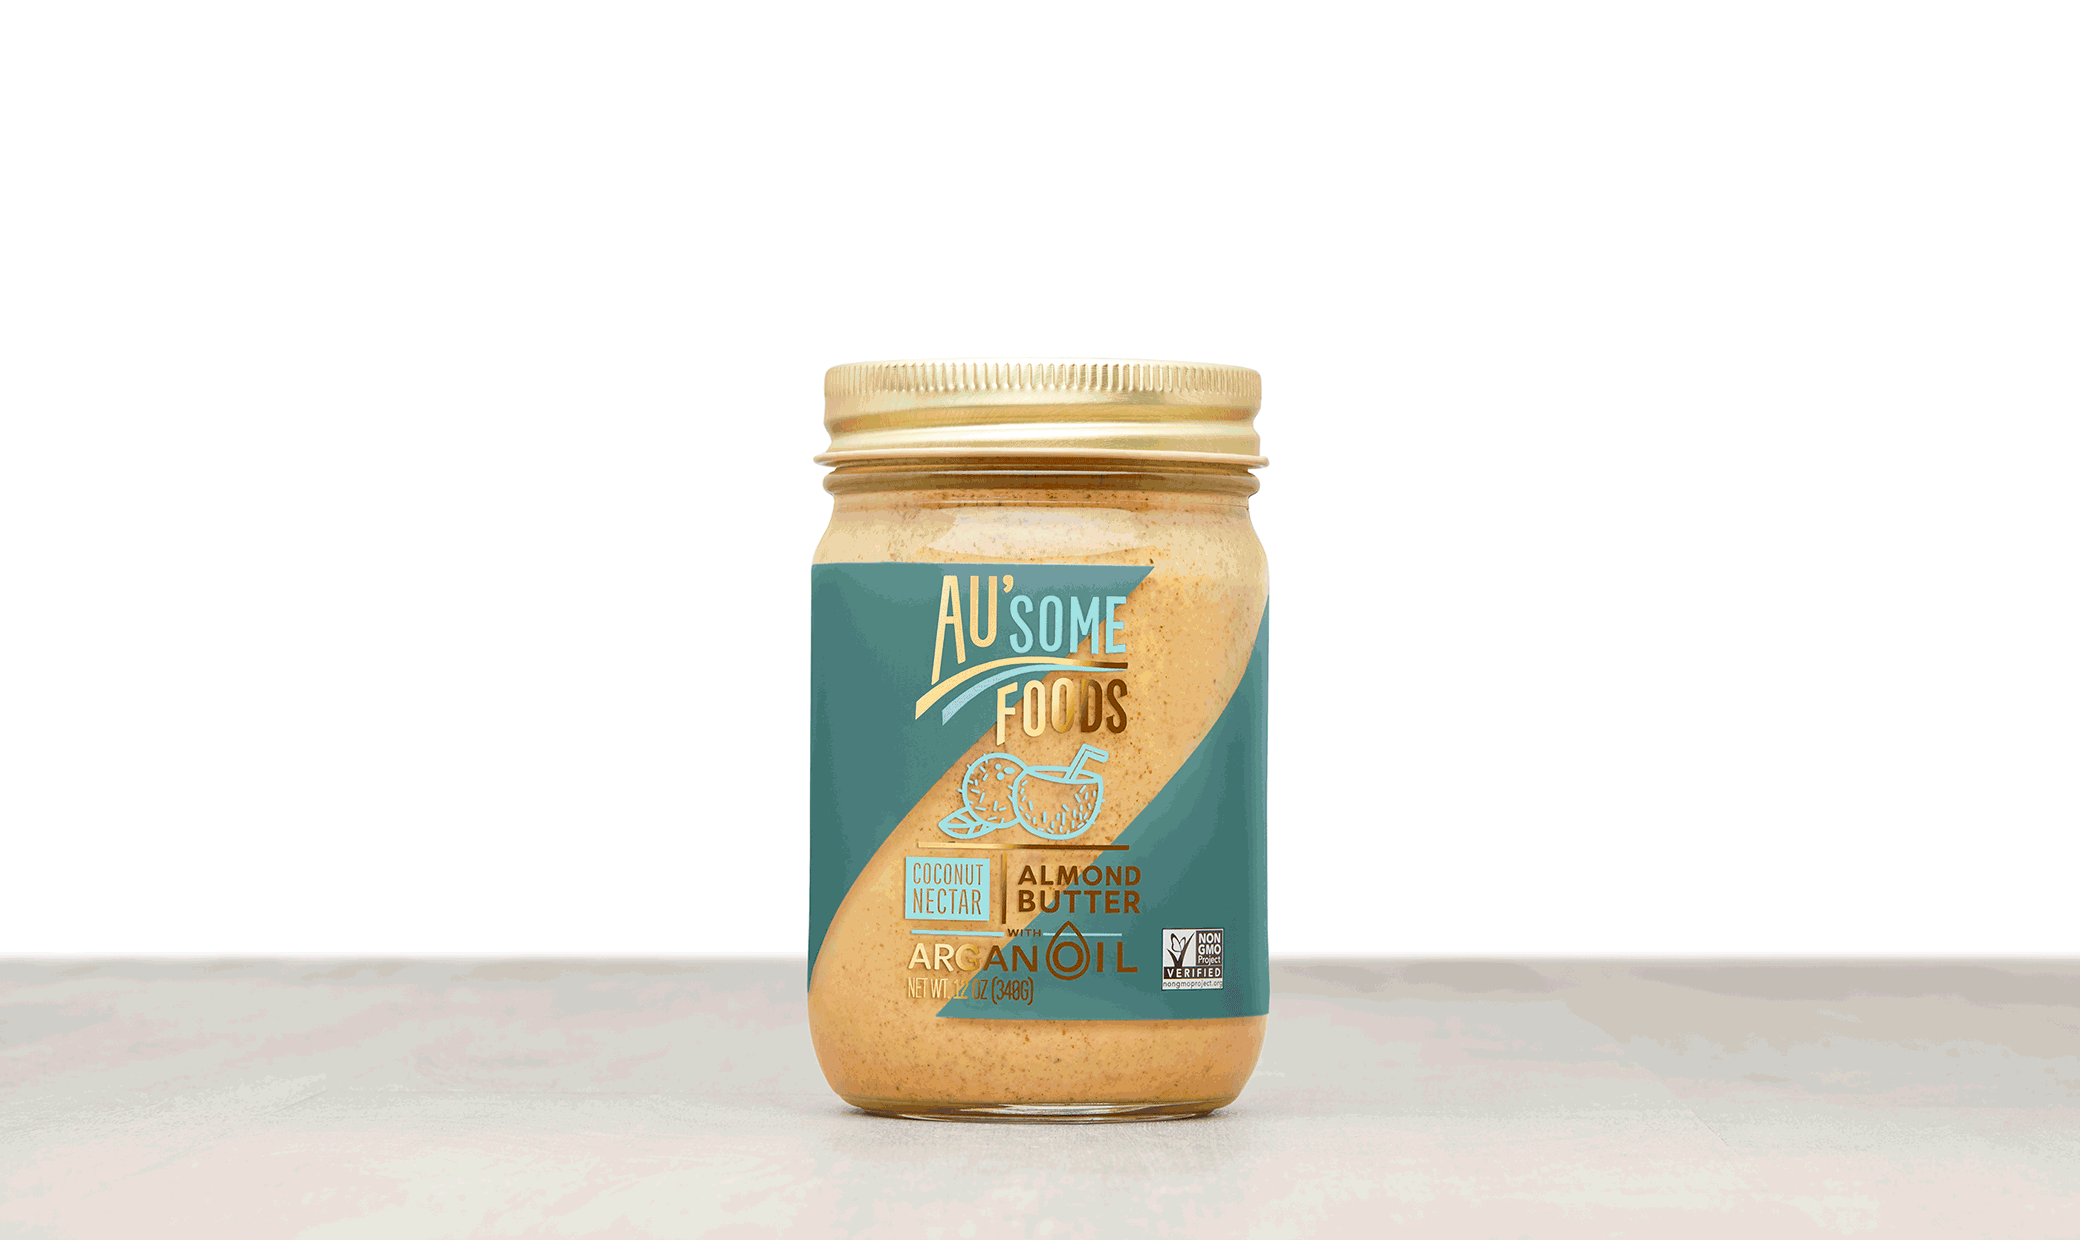 Ausome foods almond butter packaging design feat img